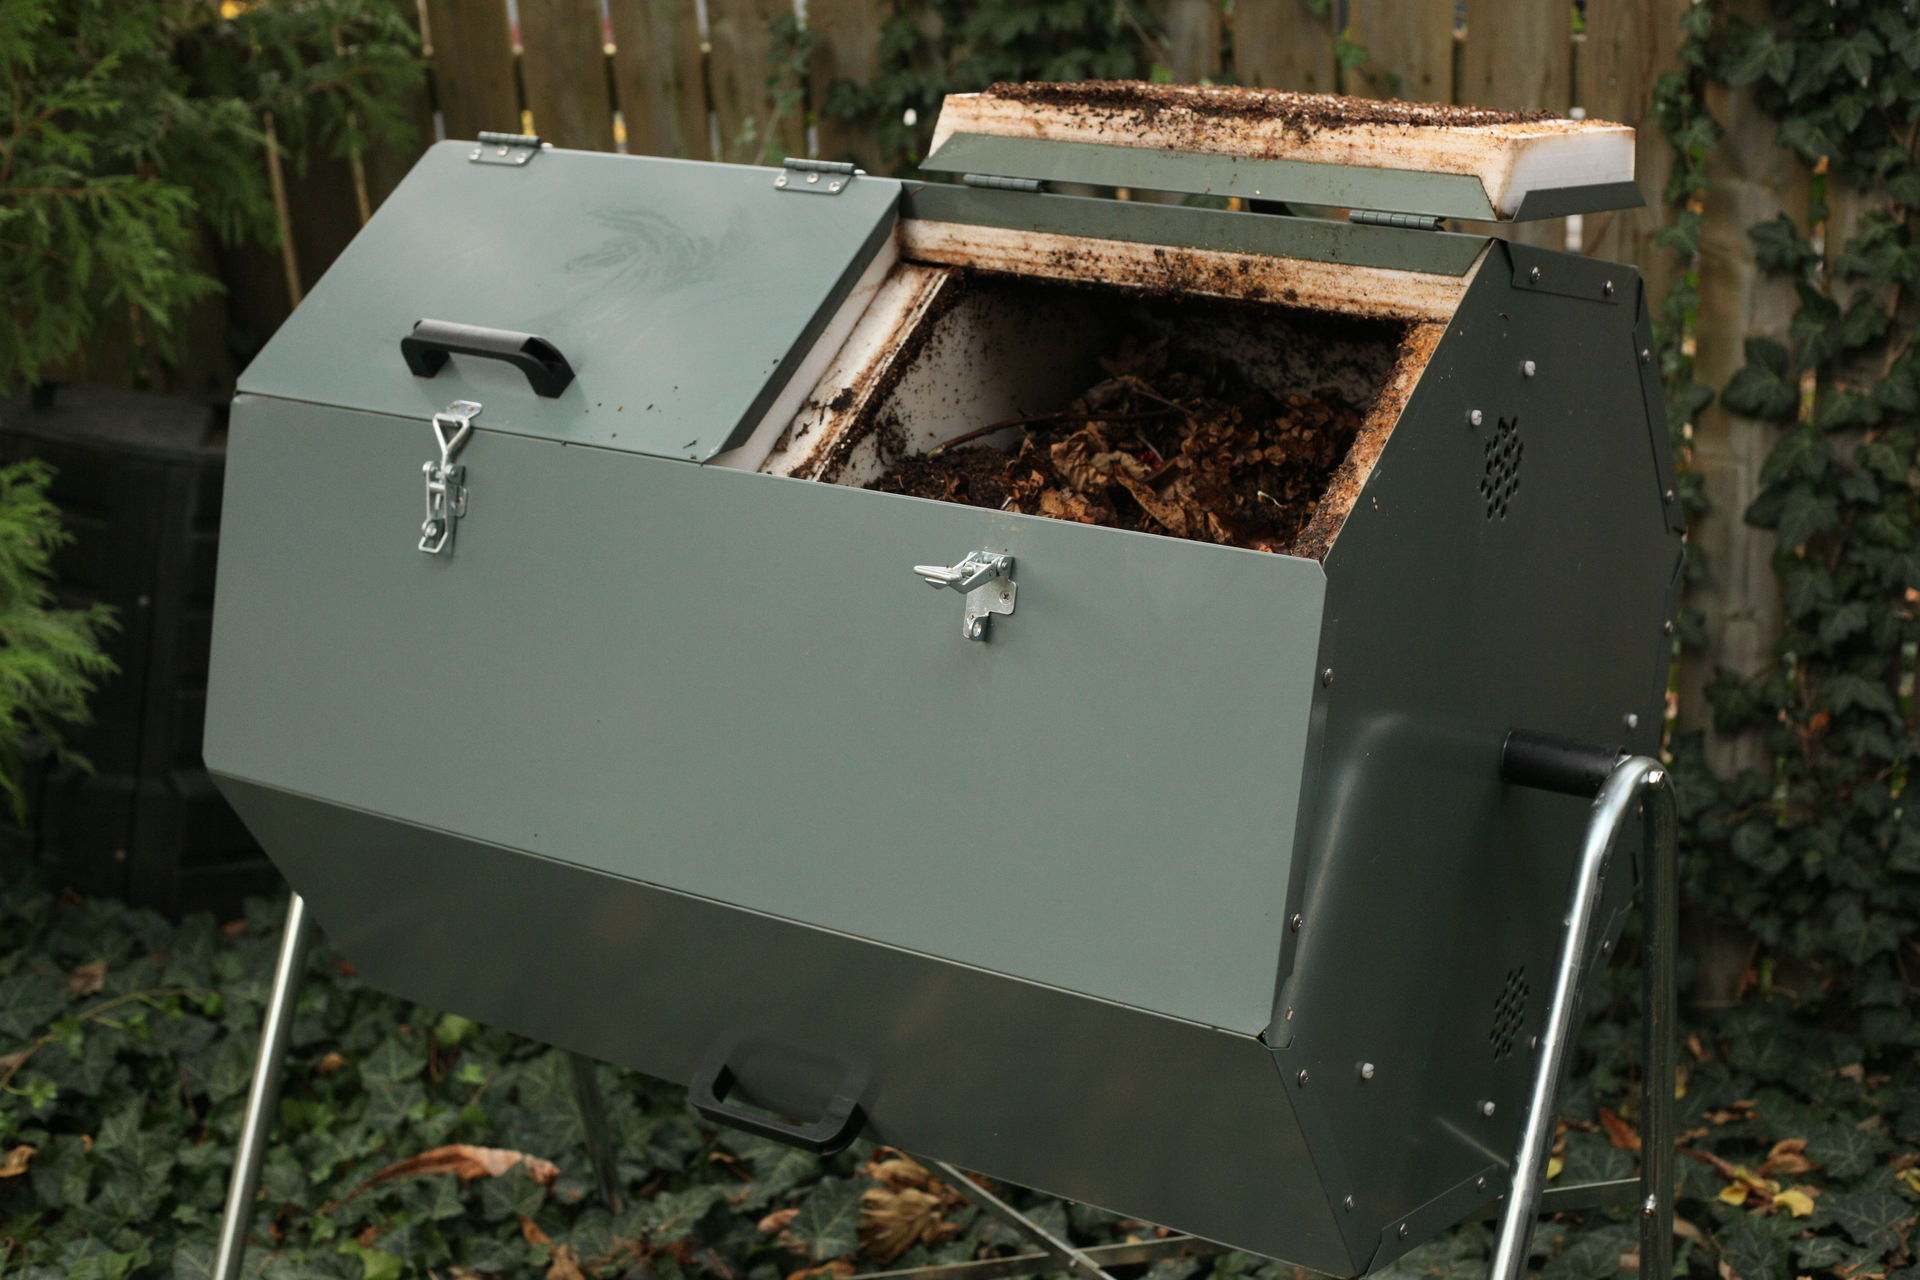 Compost bins and tumblers for more efficient composting, delivered and assembled for you by Village Compost.